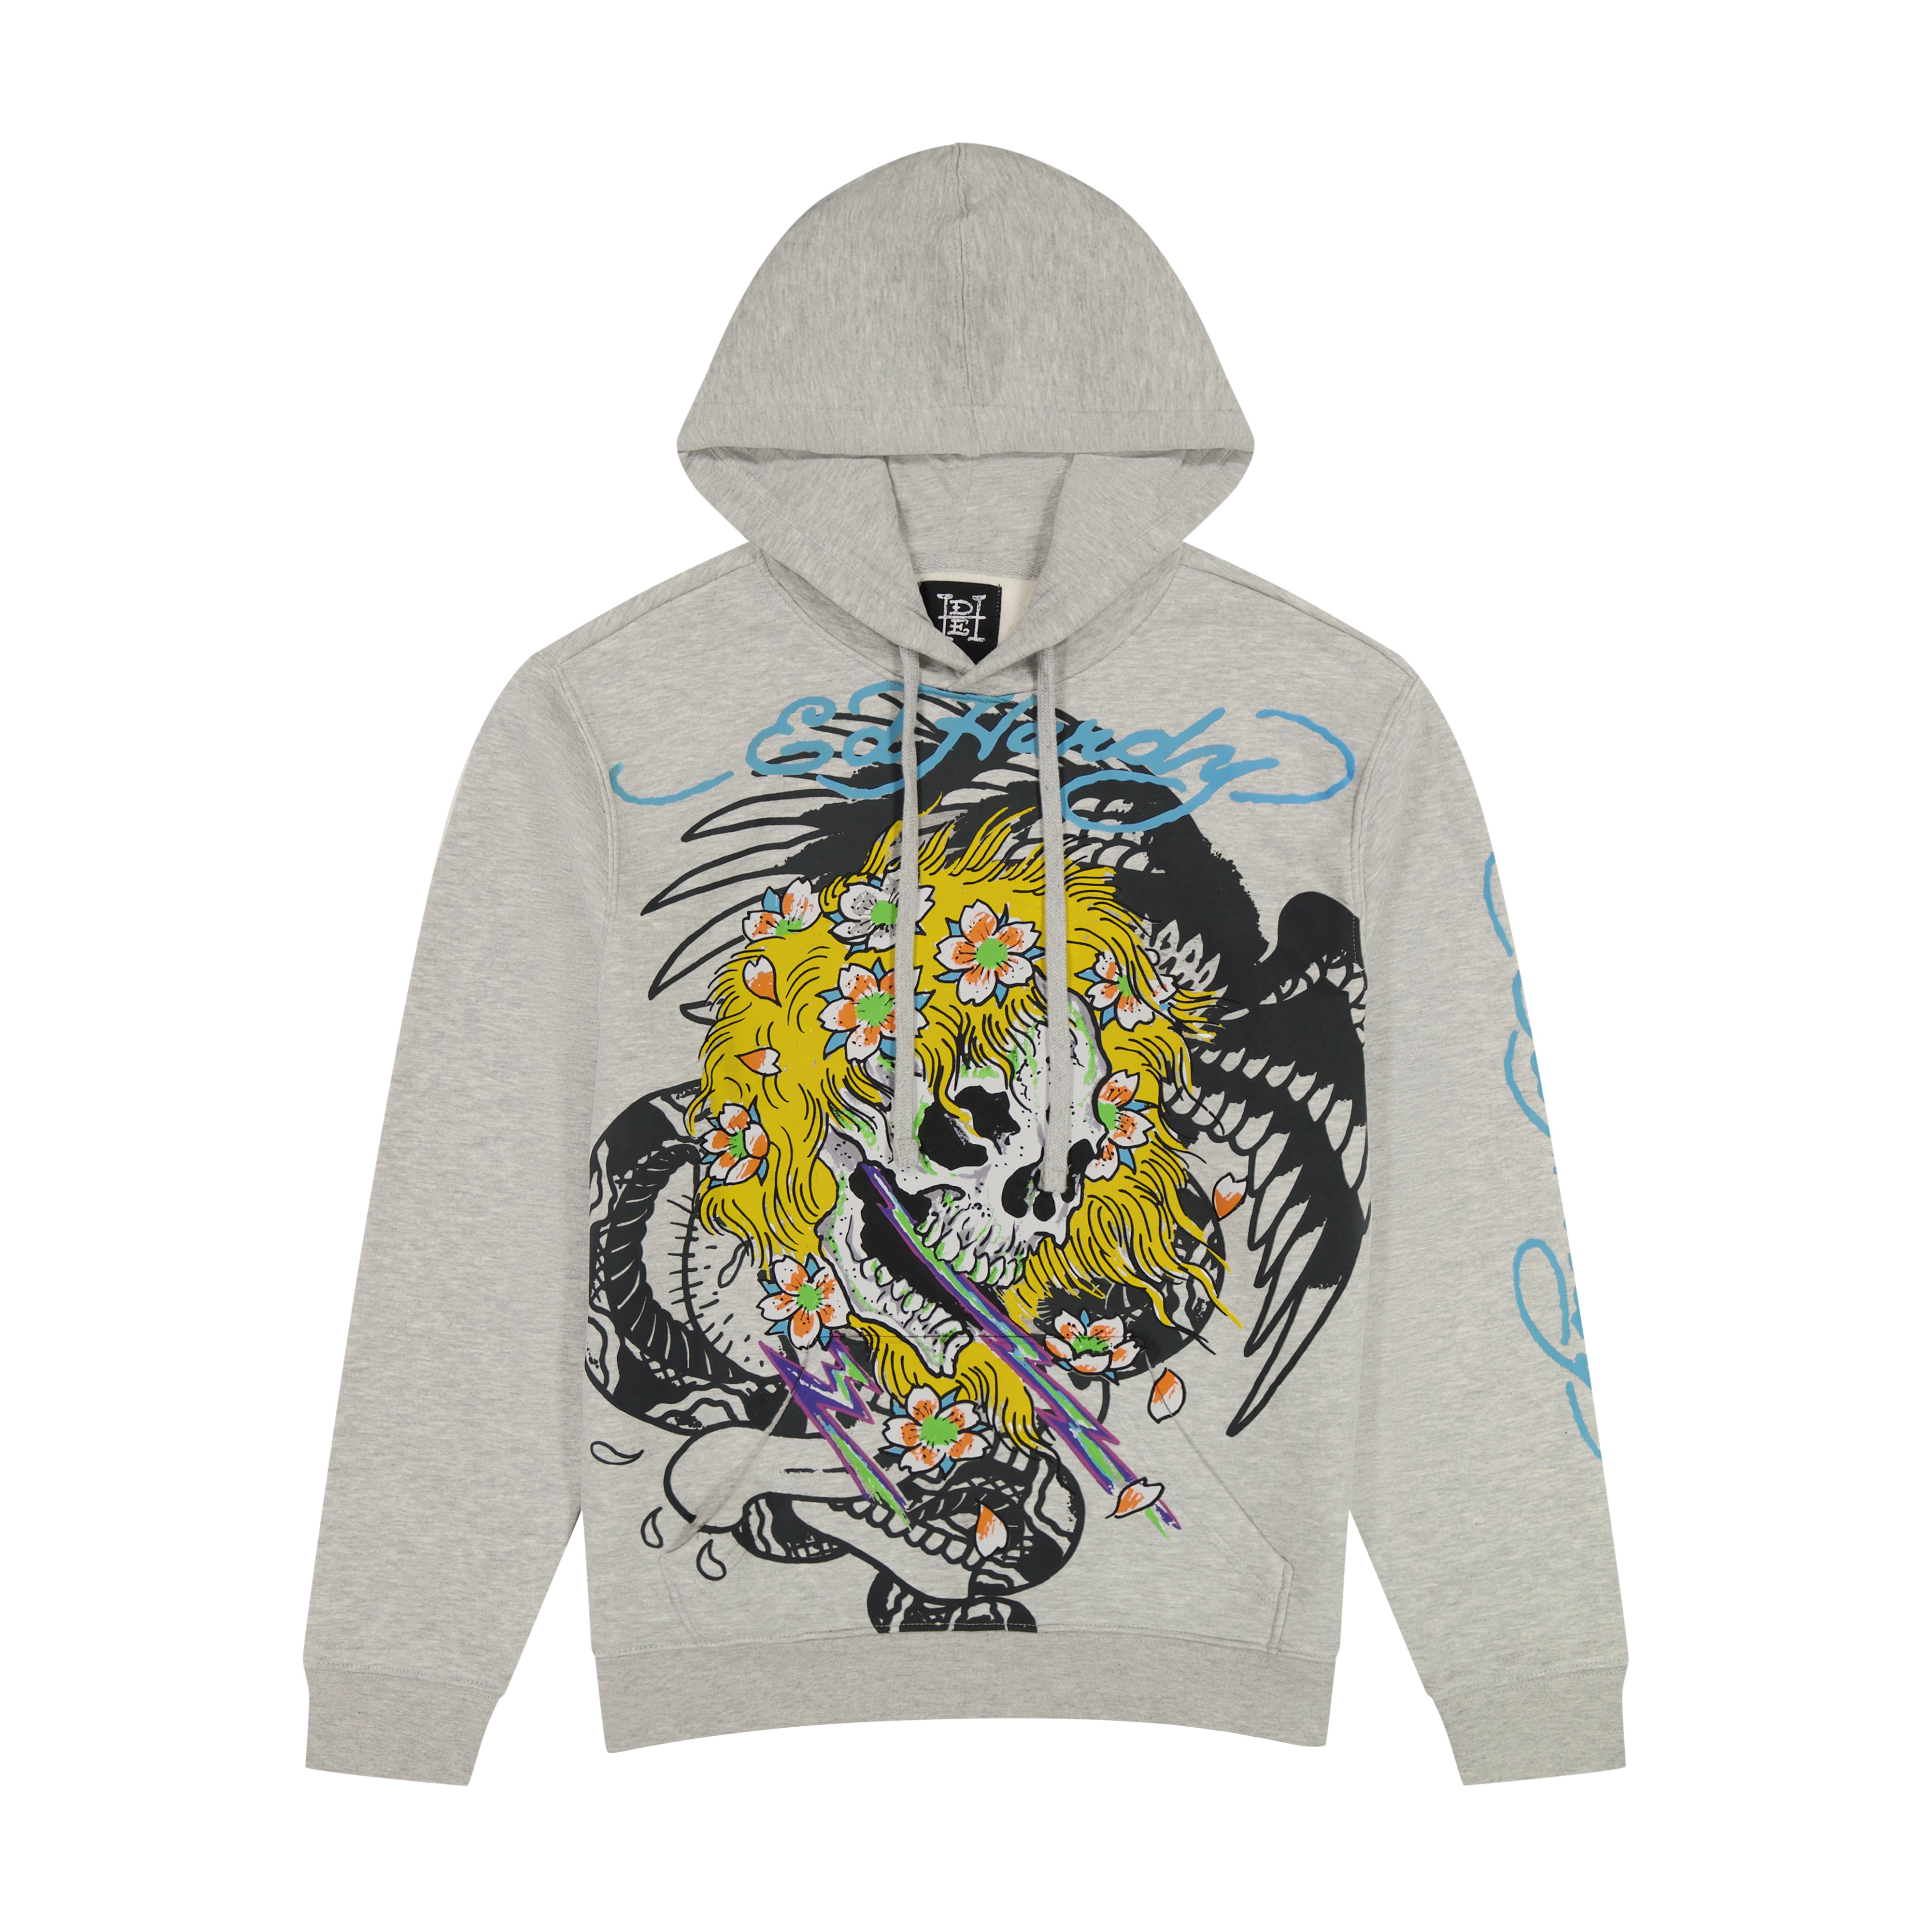 Ed Hardy | The official website of the Ed Hardy brand.